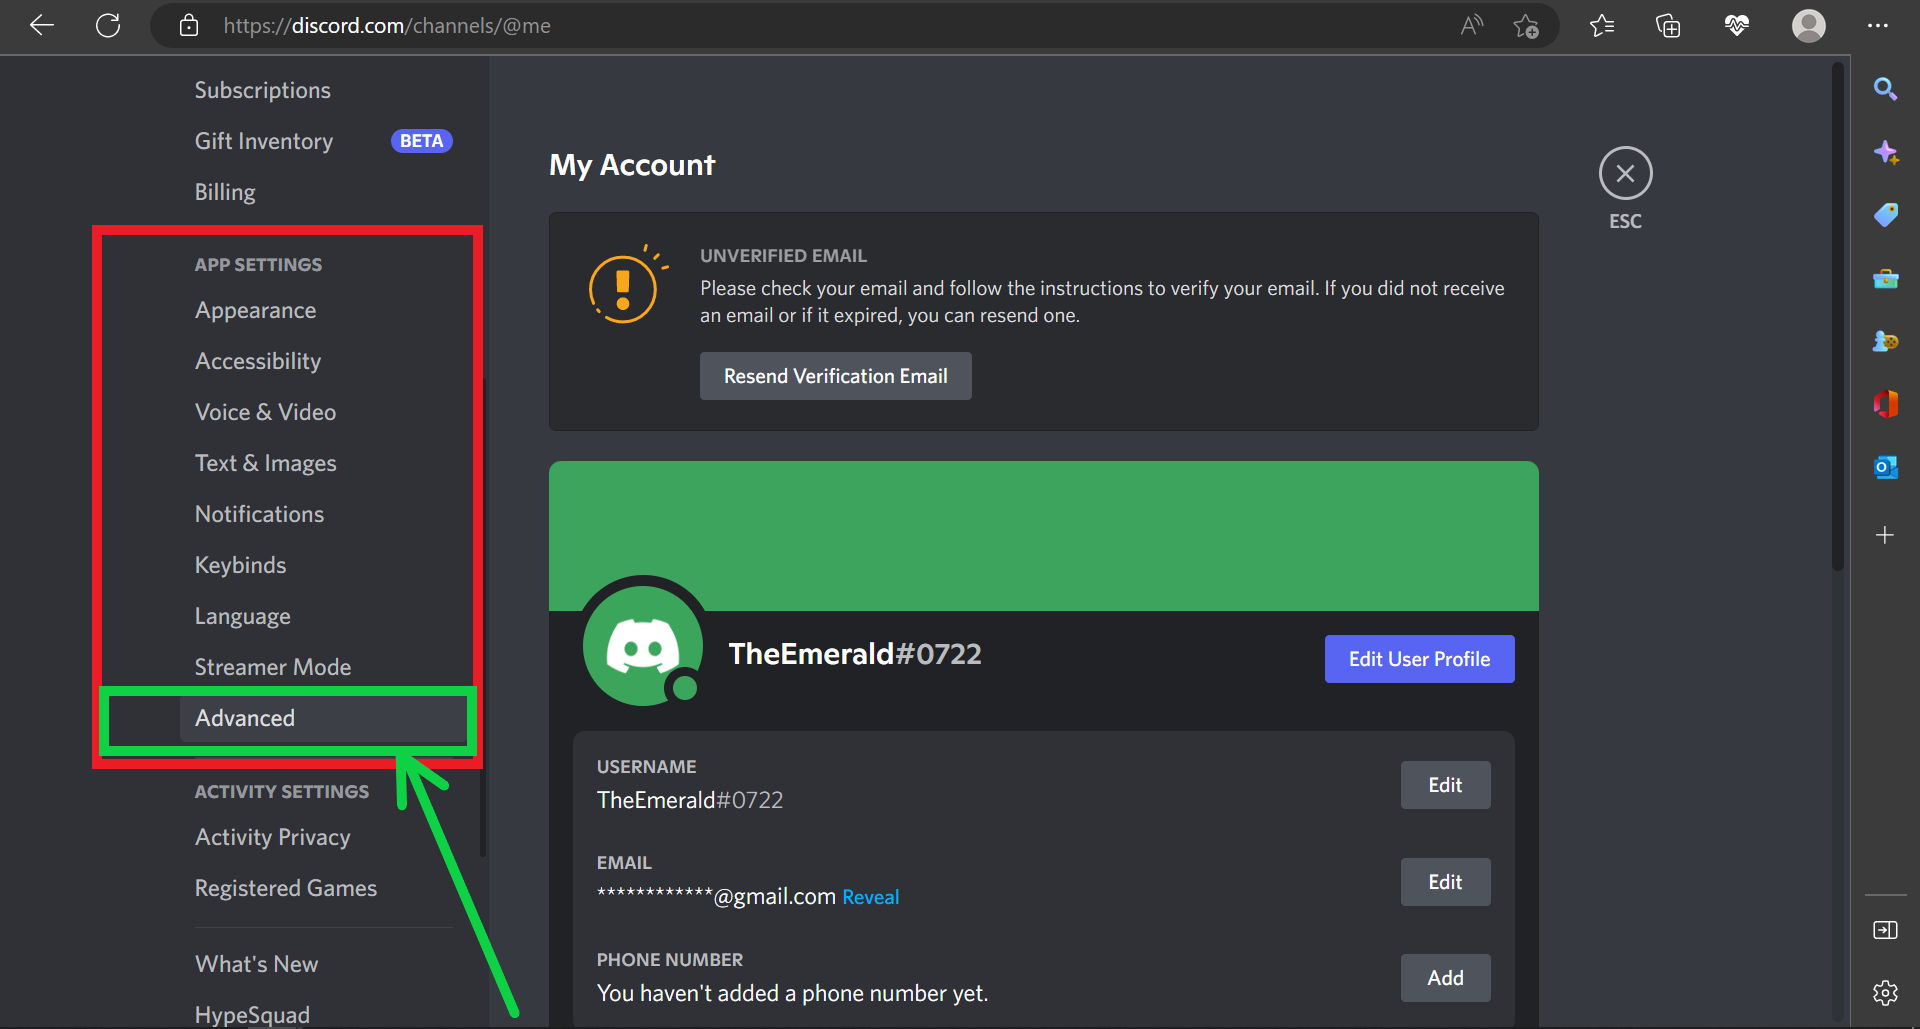 A Complete Guide on How to Report Someone on Discord